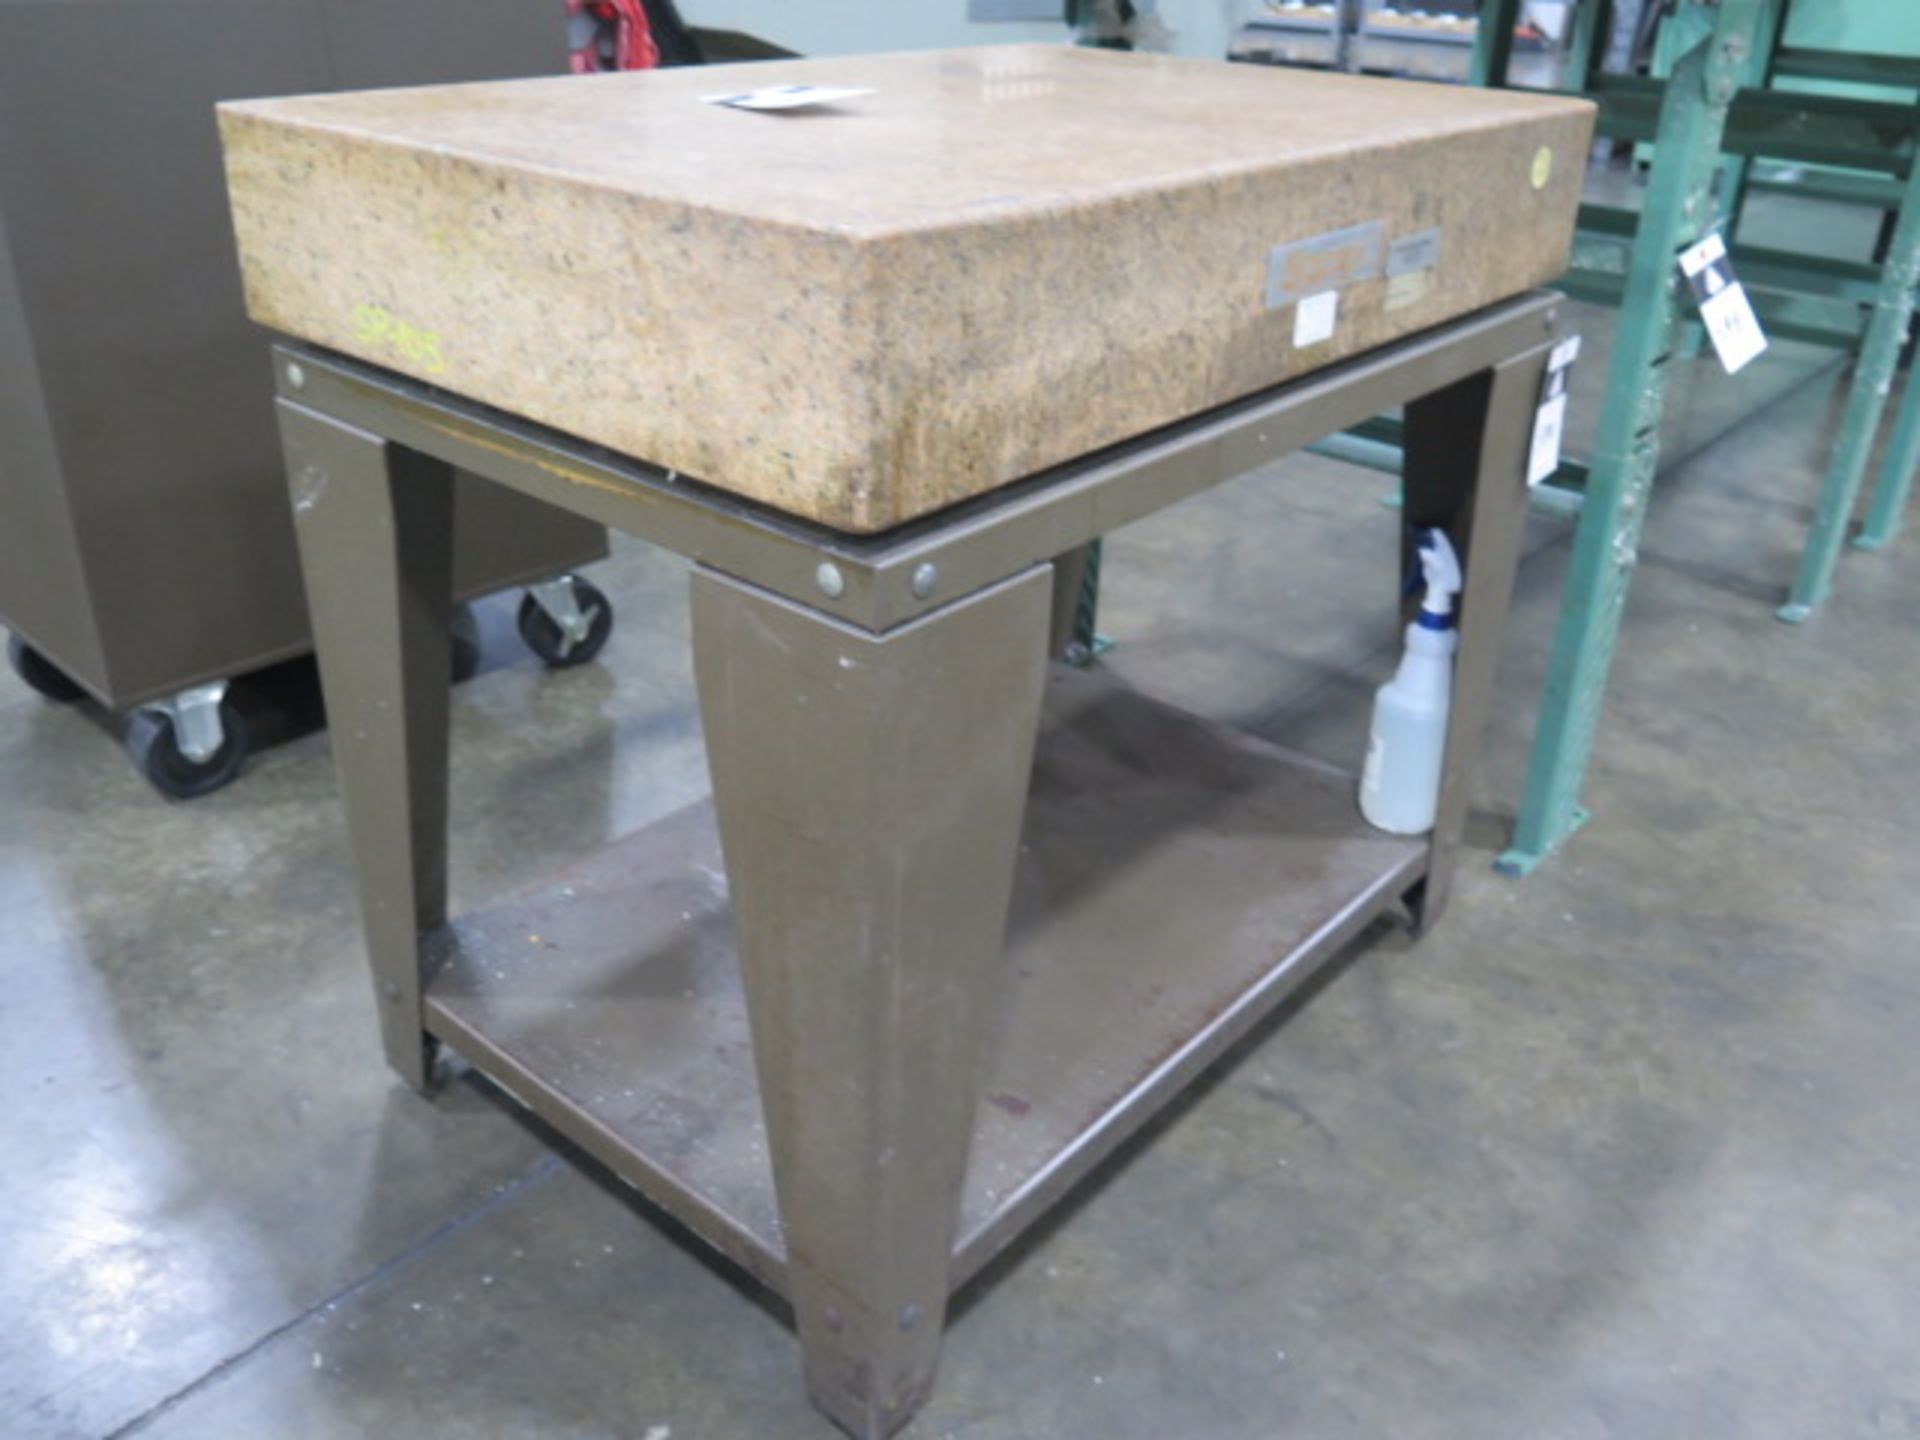 Starrett Crystal Pink 36” x 48” x 6” Granite Surface Plate w/ Stand (SOLD AS-IS - NO WARRANTY) - Image 2 of 5